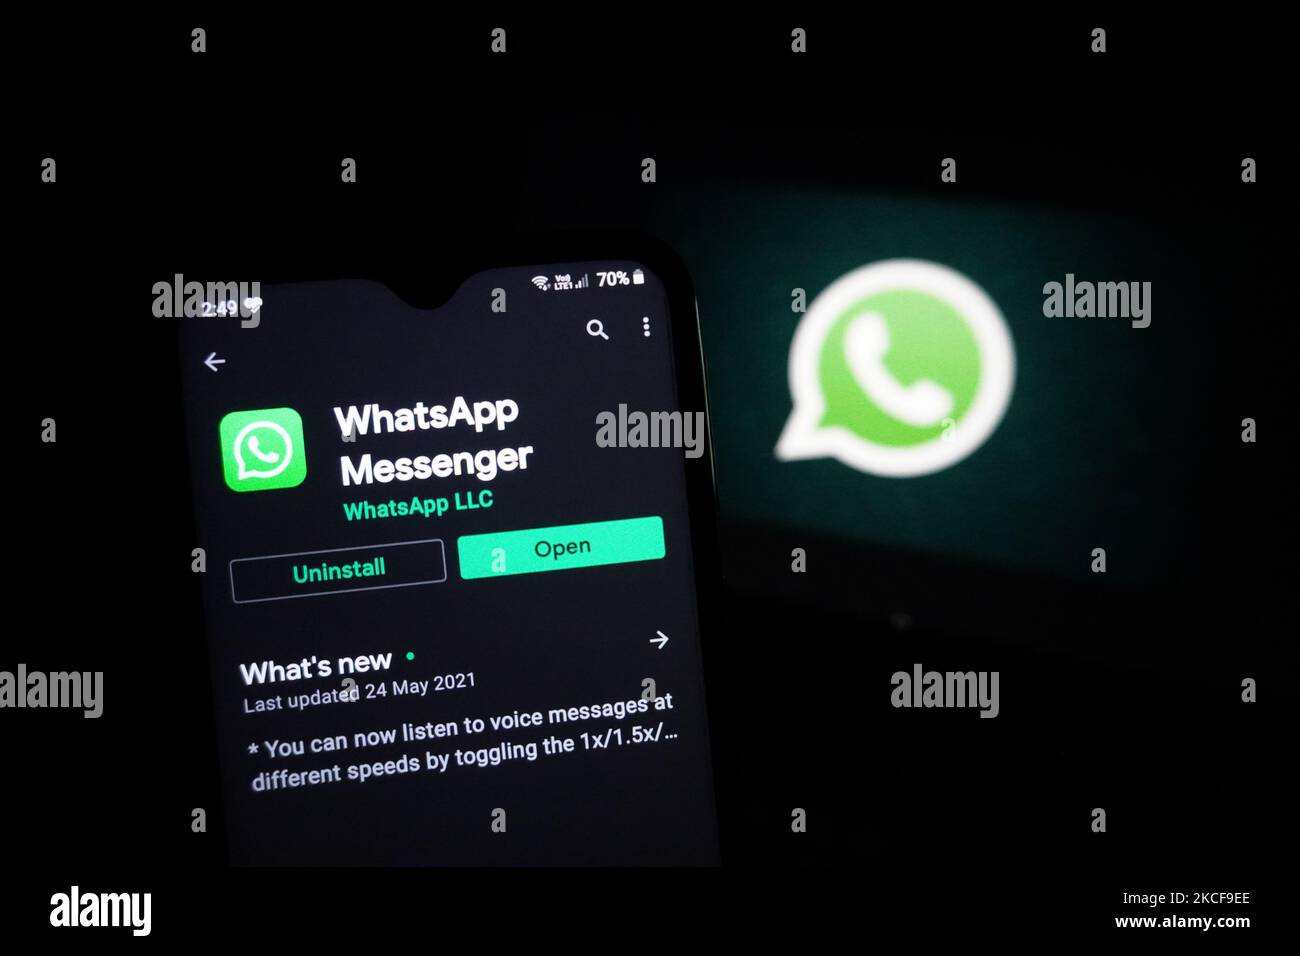 The logo of the messenger app WhatsApp is seen on the screen of a smartphone in New Delhi, India on May 27, 2021. WhatsApp has filed a legal complaint in Delhi against the government seeking to block regulations coming into force from Wednesday that experts say would compel the California-based Facebook unit to break privacy protections, according to Reuters sources. (Photo by Mayank Makhija/NurPhoto) Stock Photo